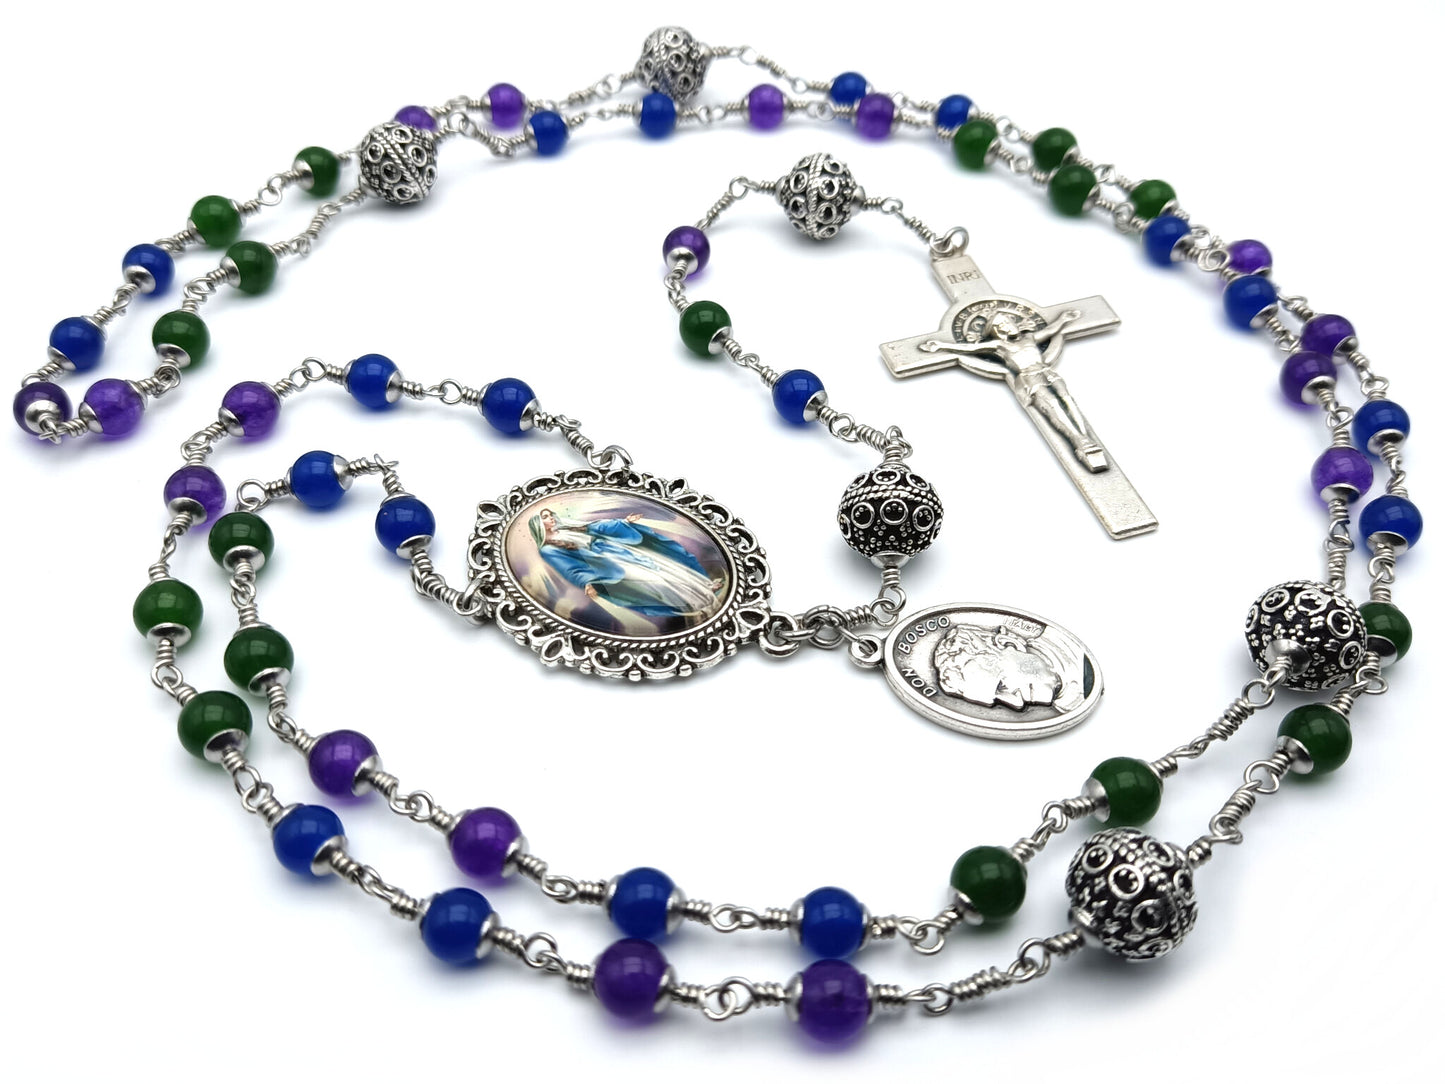 Unbreakable Immaculate Conception unique rosary beads with agate gemstone beads, filigree silver pater beads, Saint Benedict crucifix and picture centre medal.